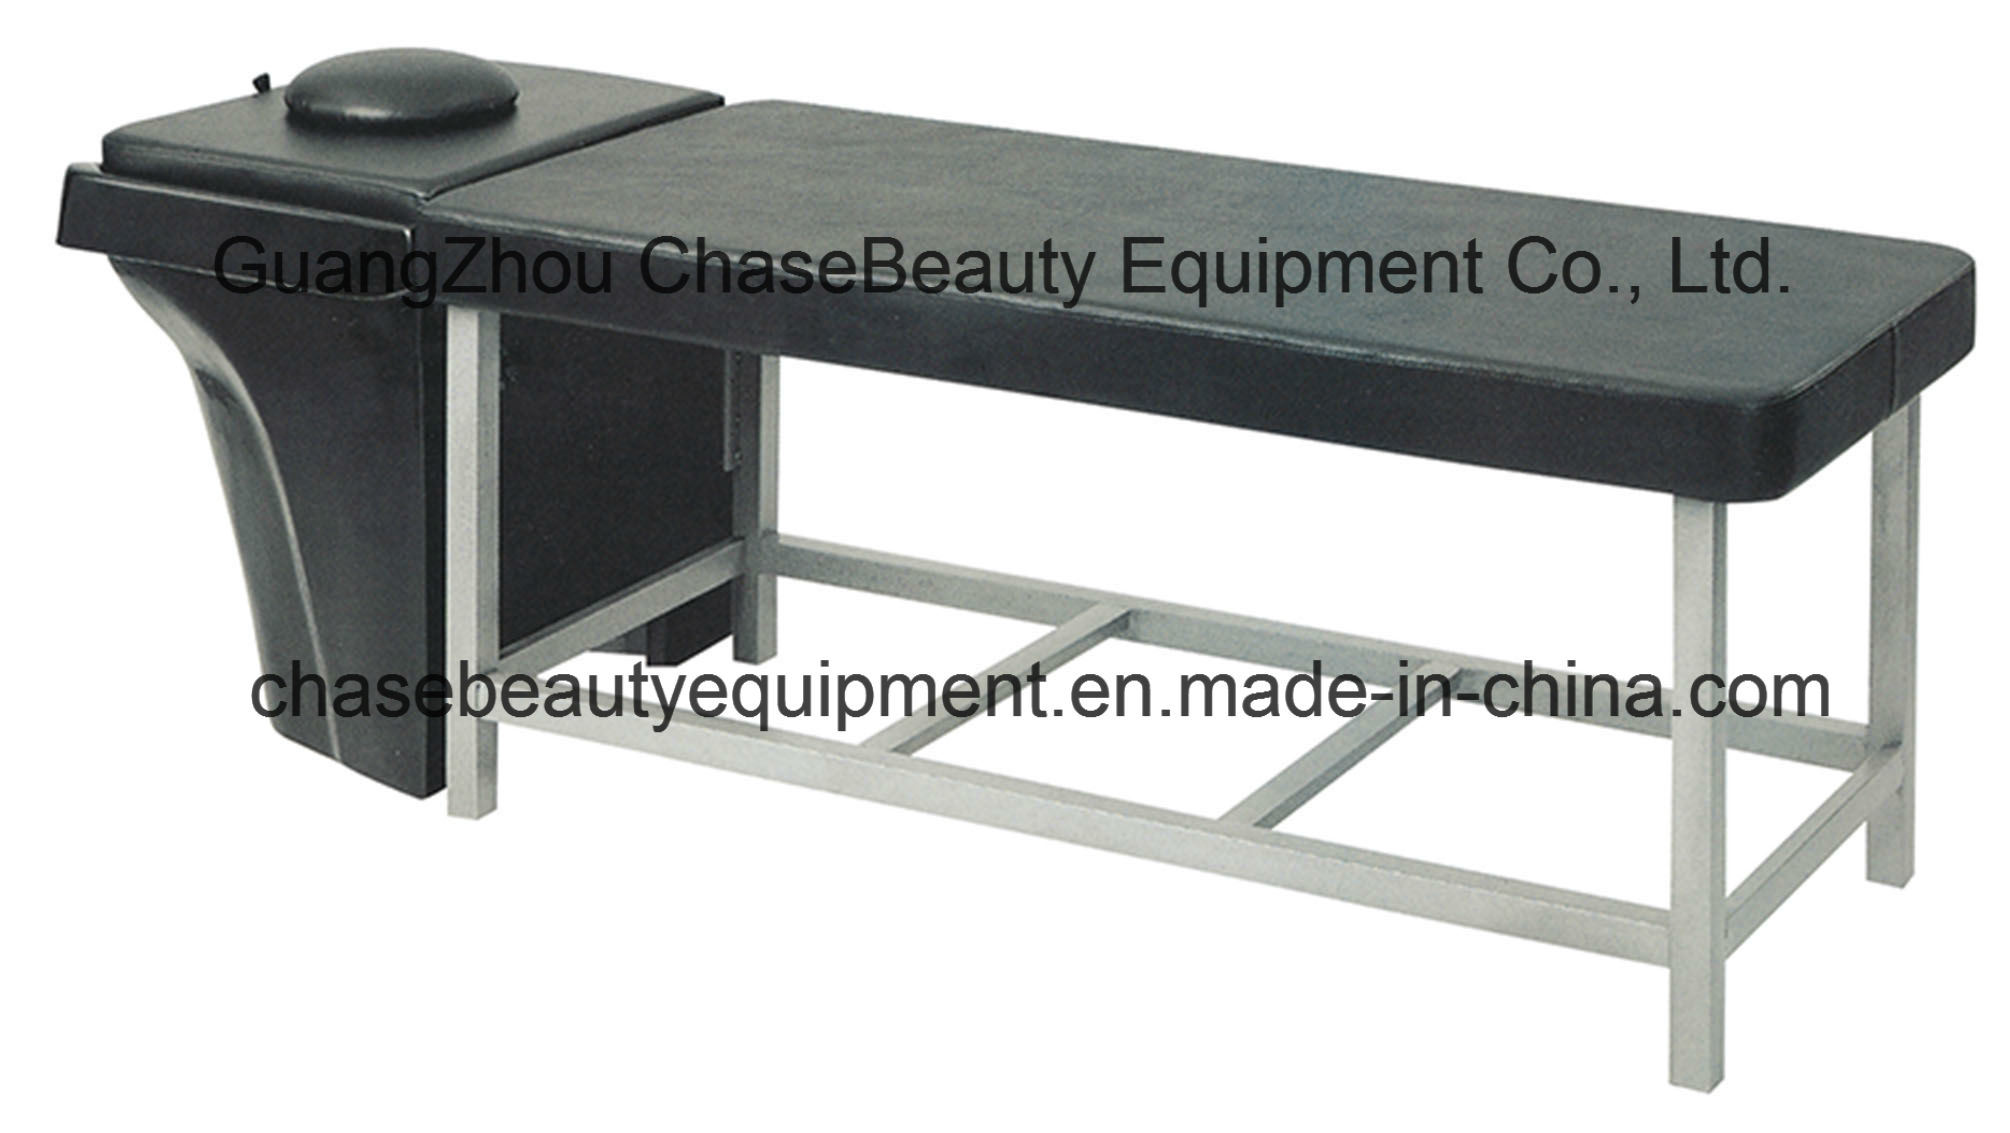 Thailand Style Shampoo Chair &Bed for Beauty Salon Equipment